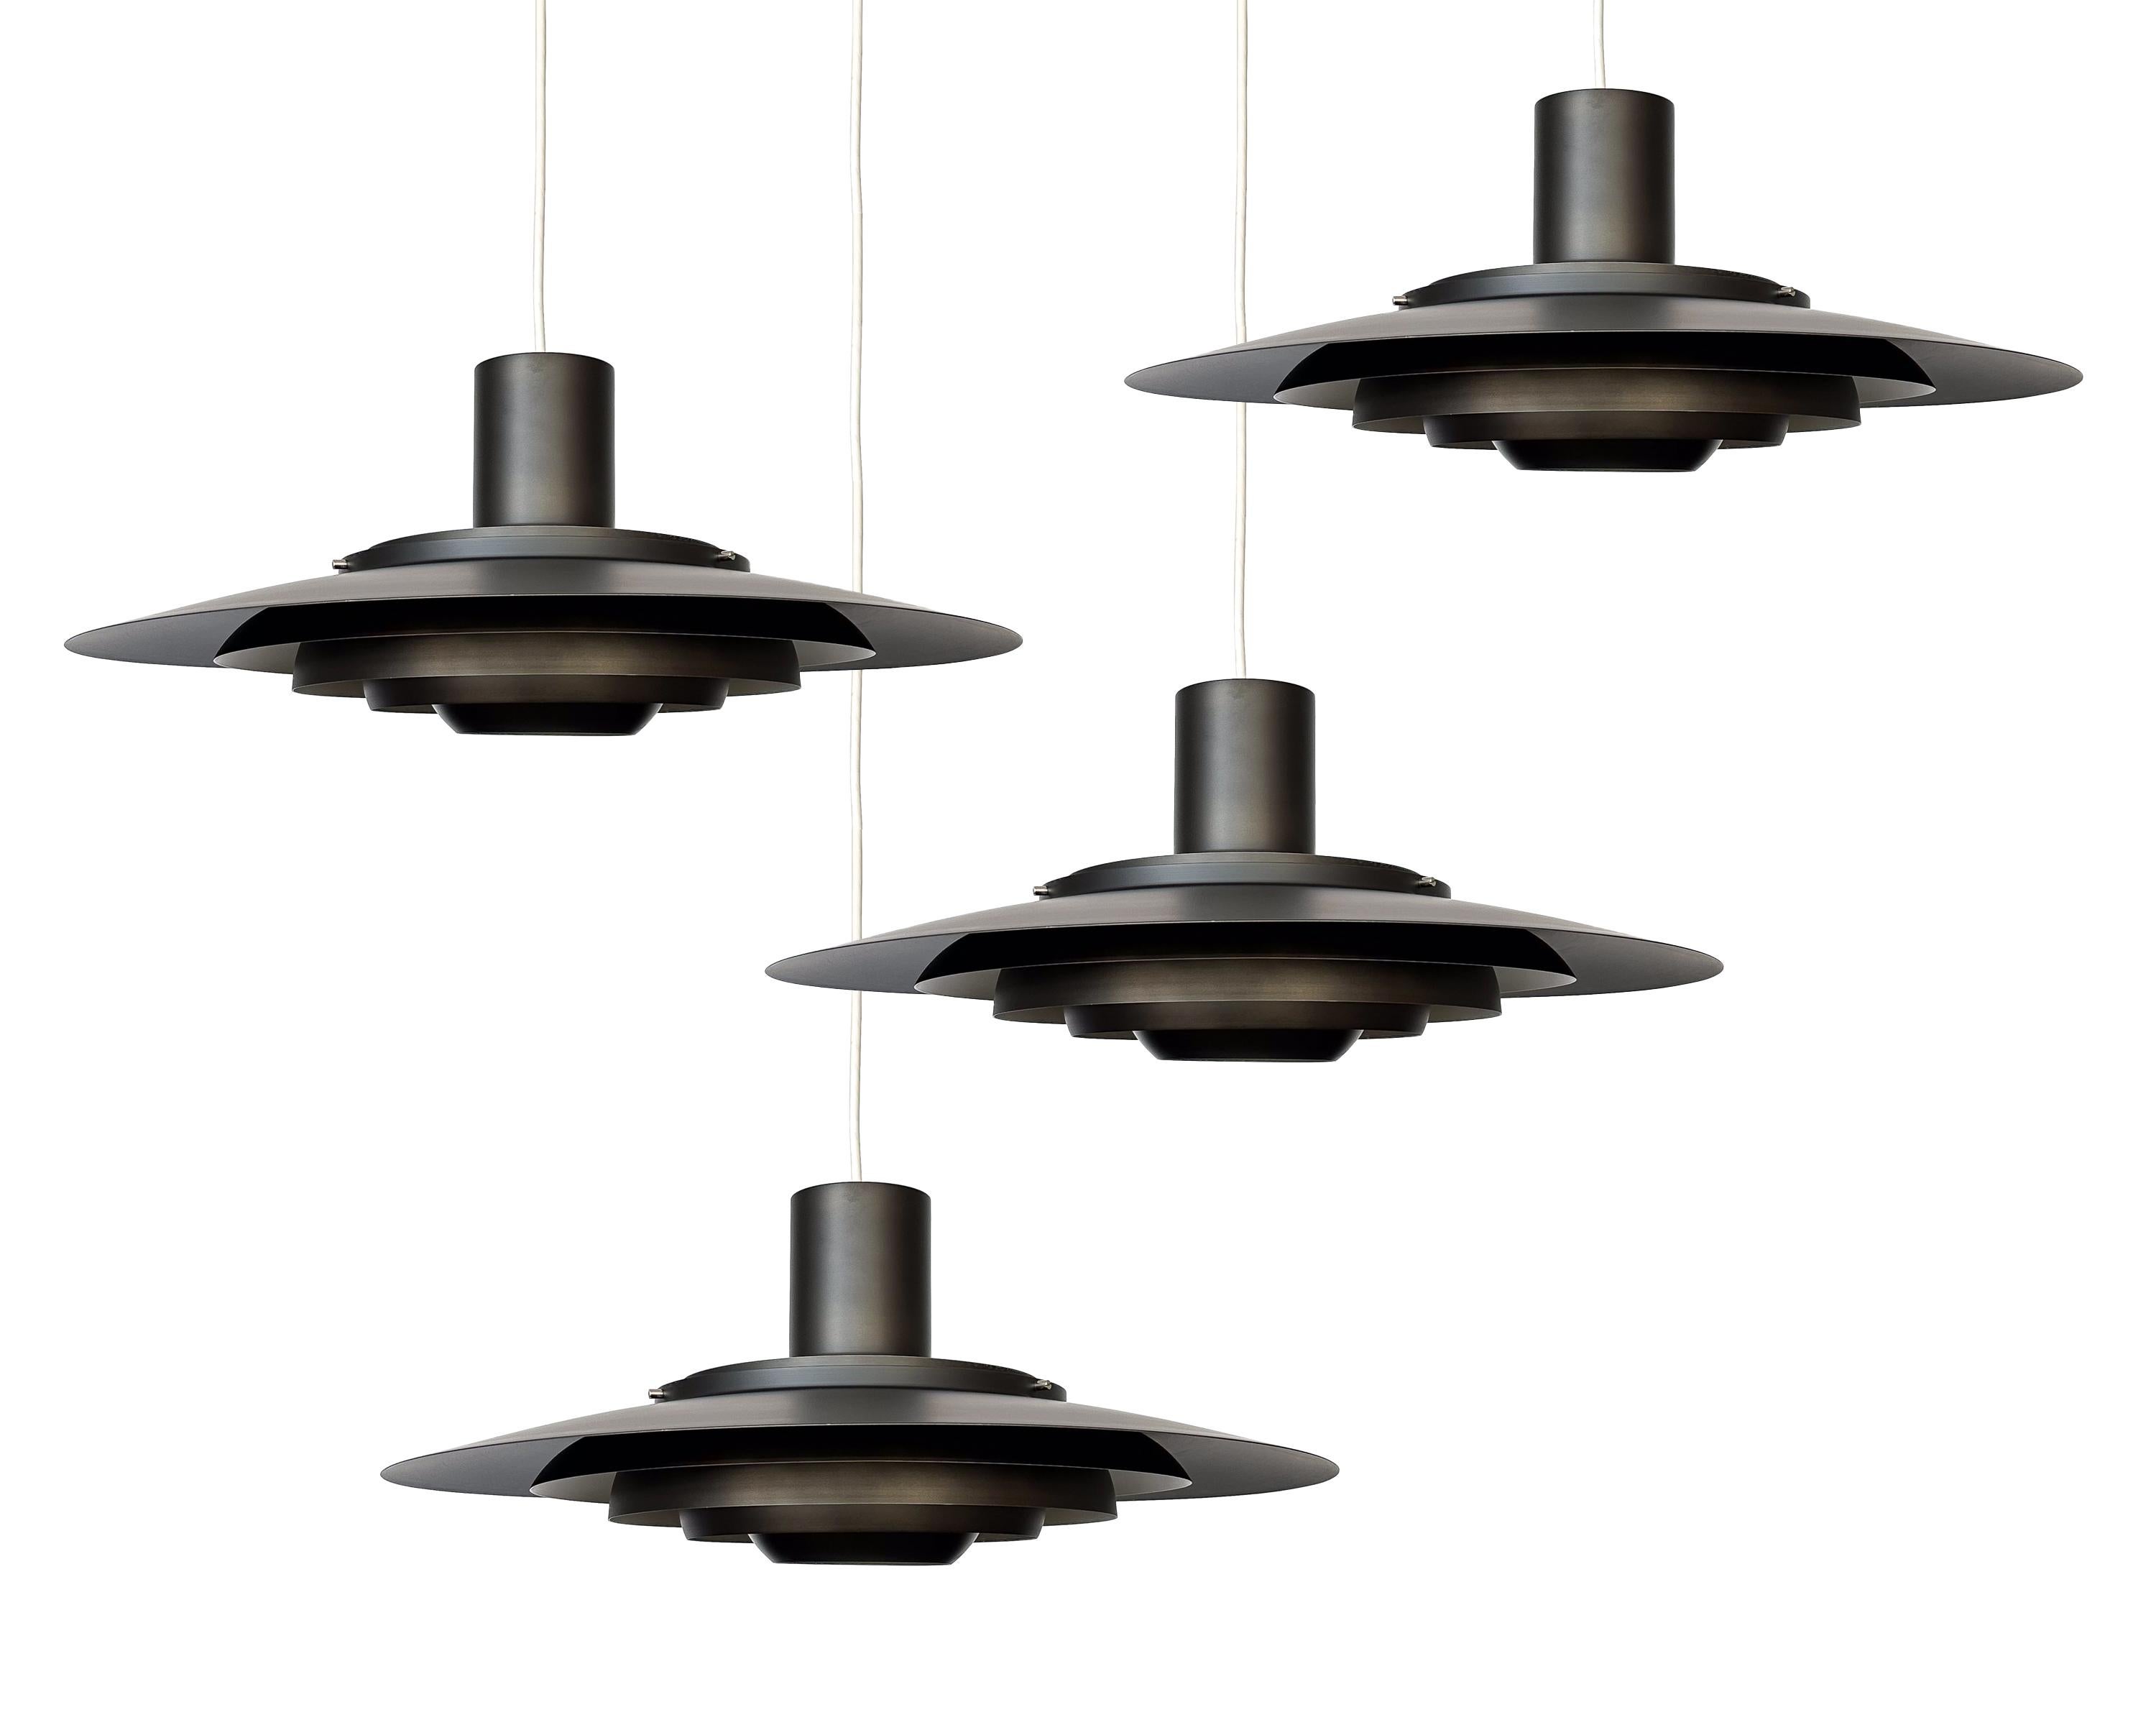 Discover the epitome of Danish sophistication with this extraordinary rare bronze pendant chandelier, designed by the iconic design duo Preben Fabricius and Jorgen Kastholm in 1964 for Nordisk Solar, Denmark circa 1960s. Model 74407 is a grand